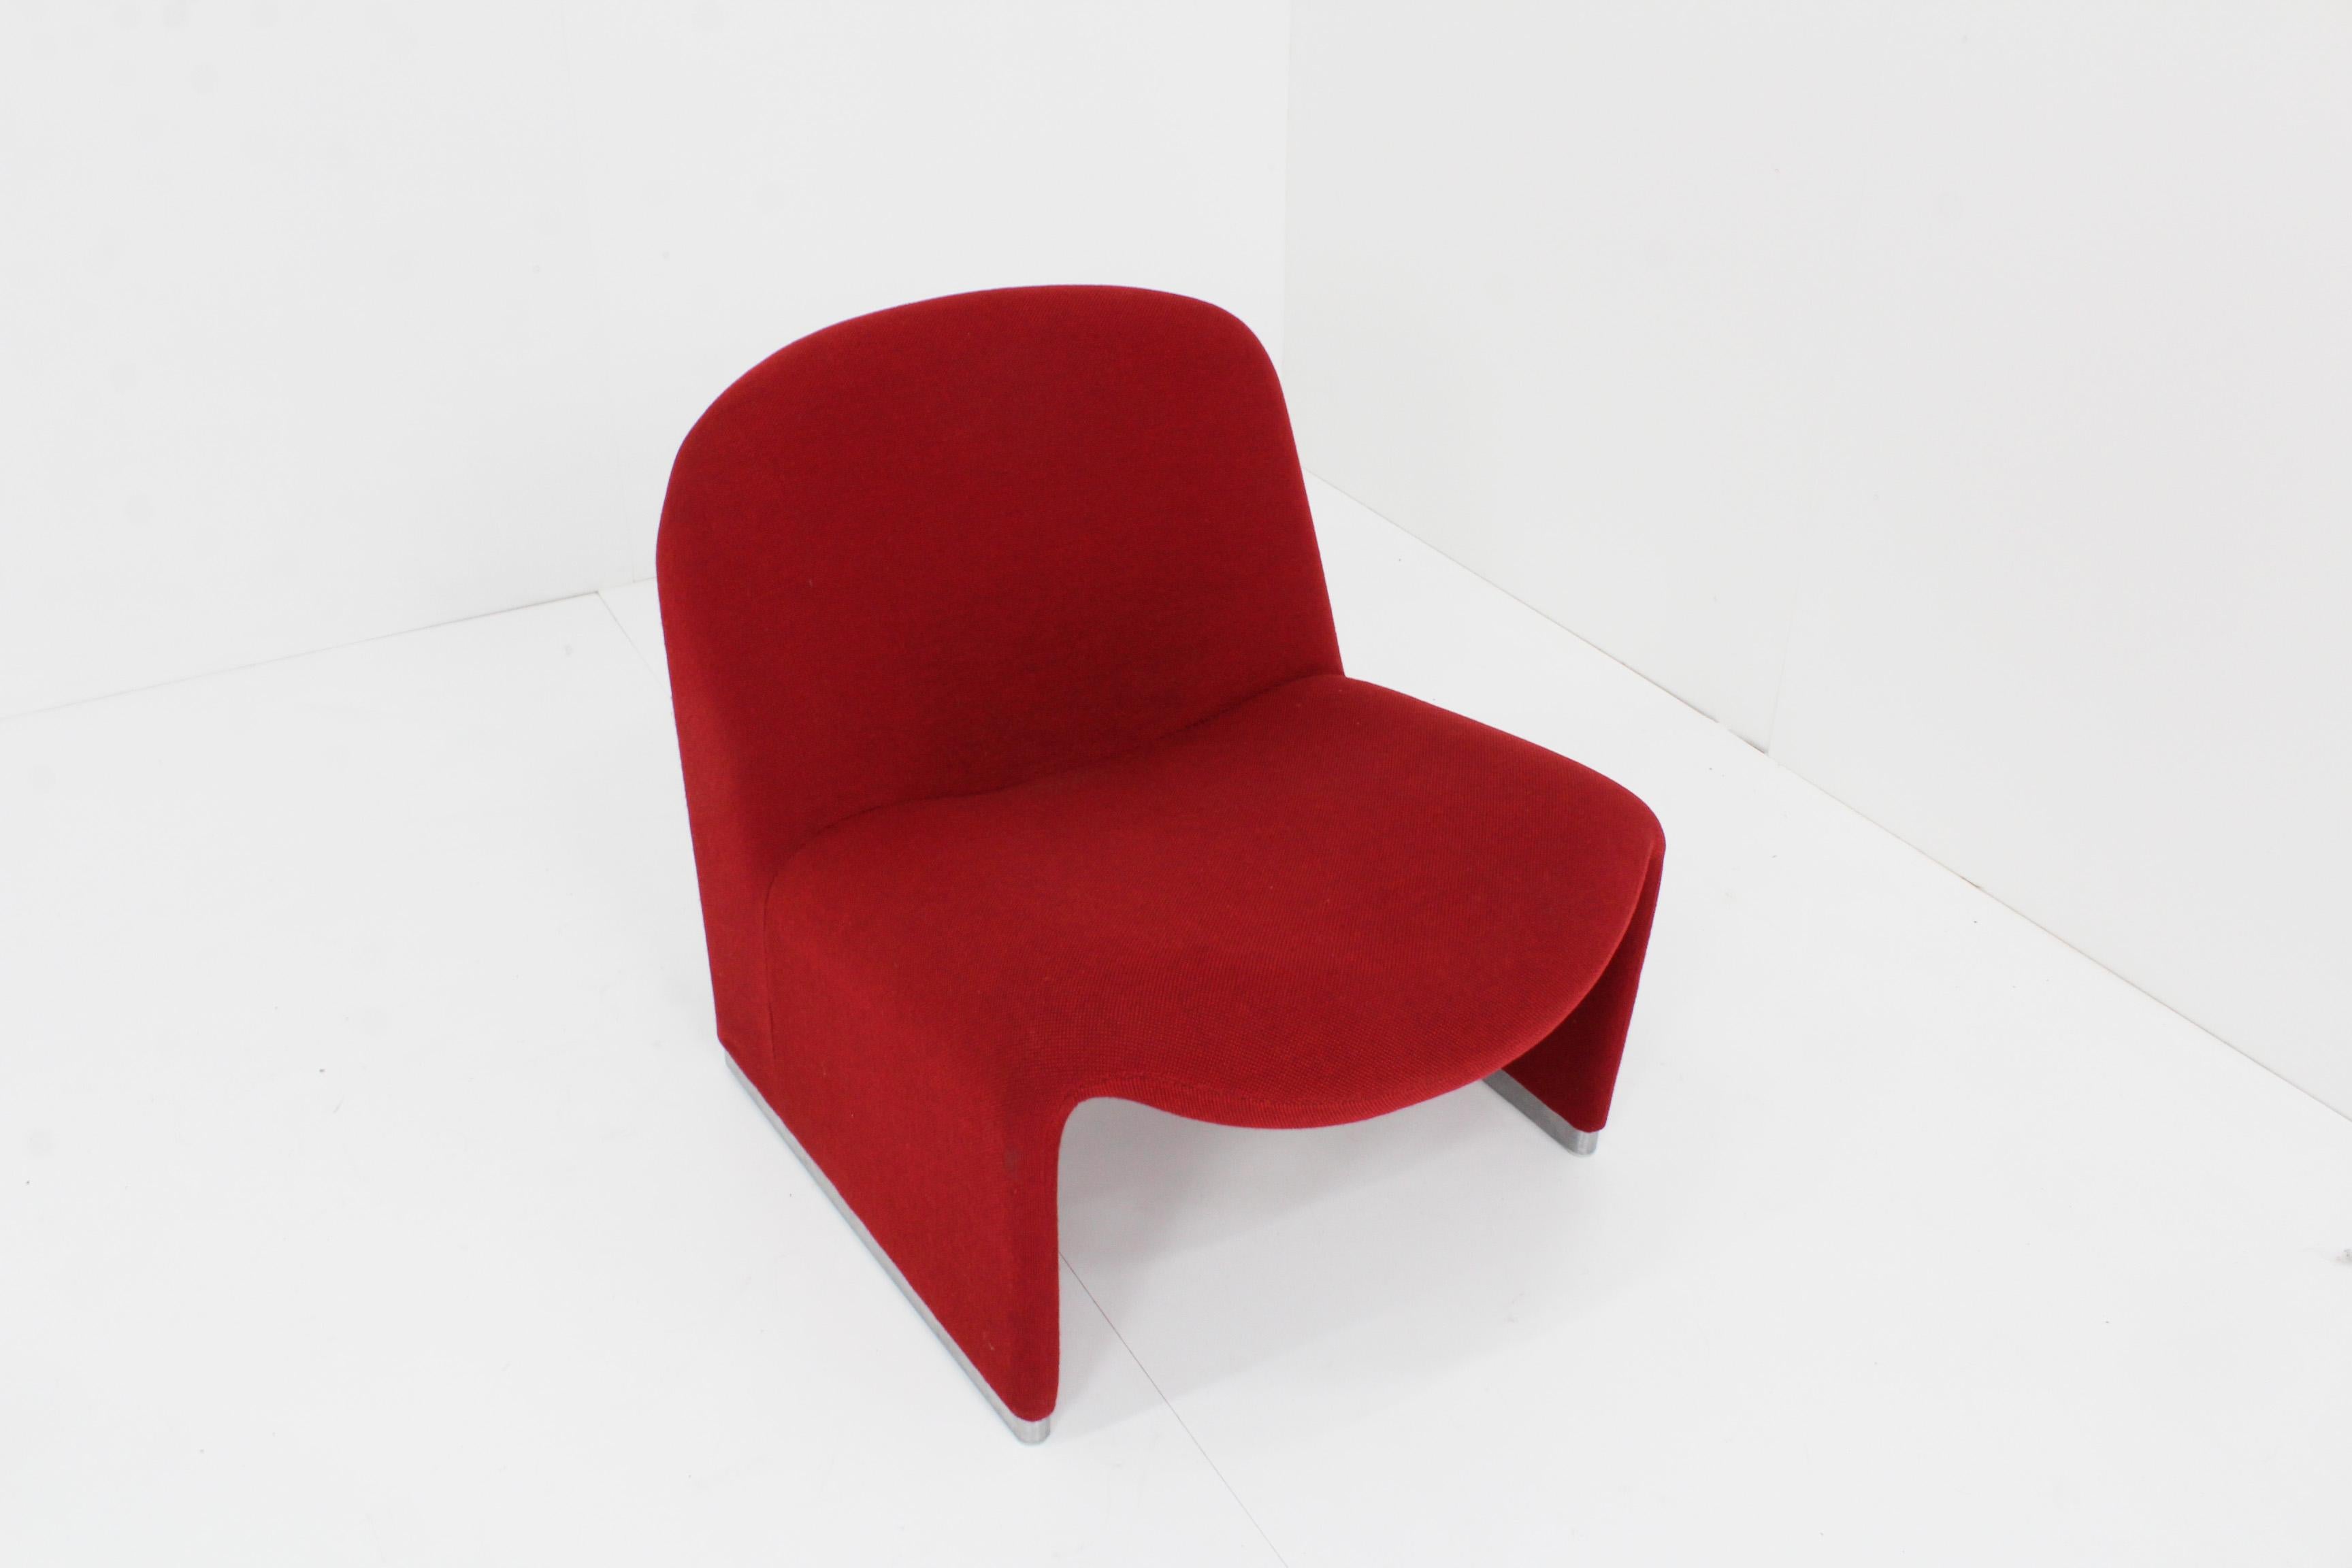 Metal Giancarlo Piretti Alky Lounge Chair in Red / Magenta Fabric for Anonima Castelli